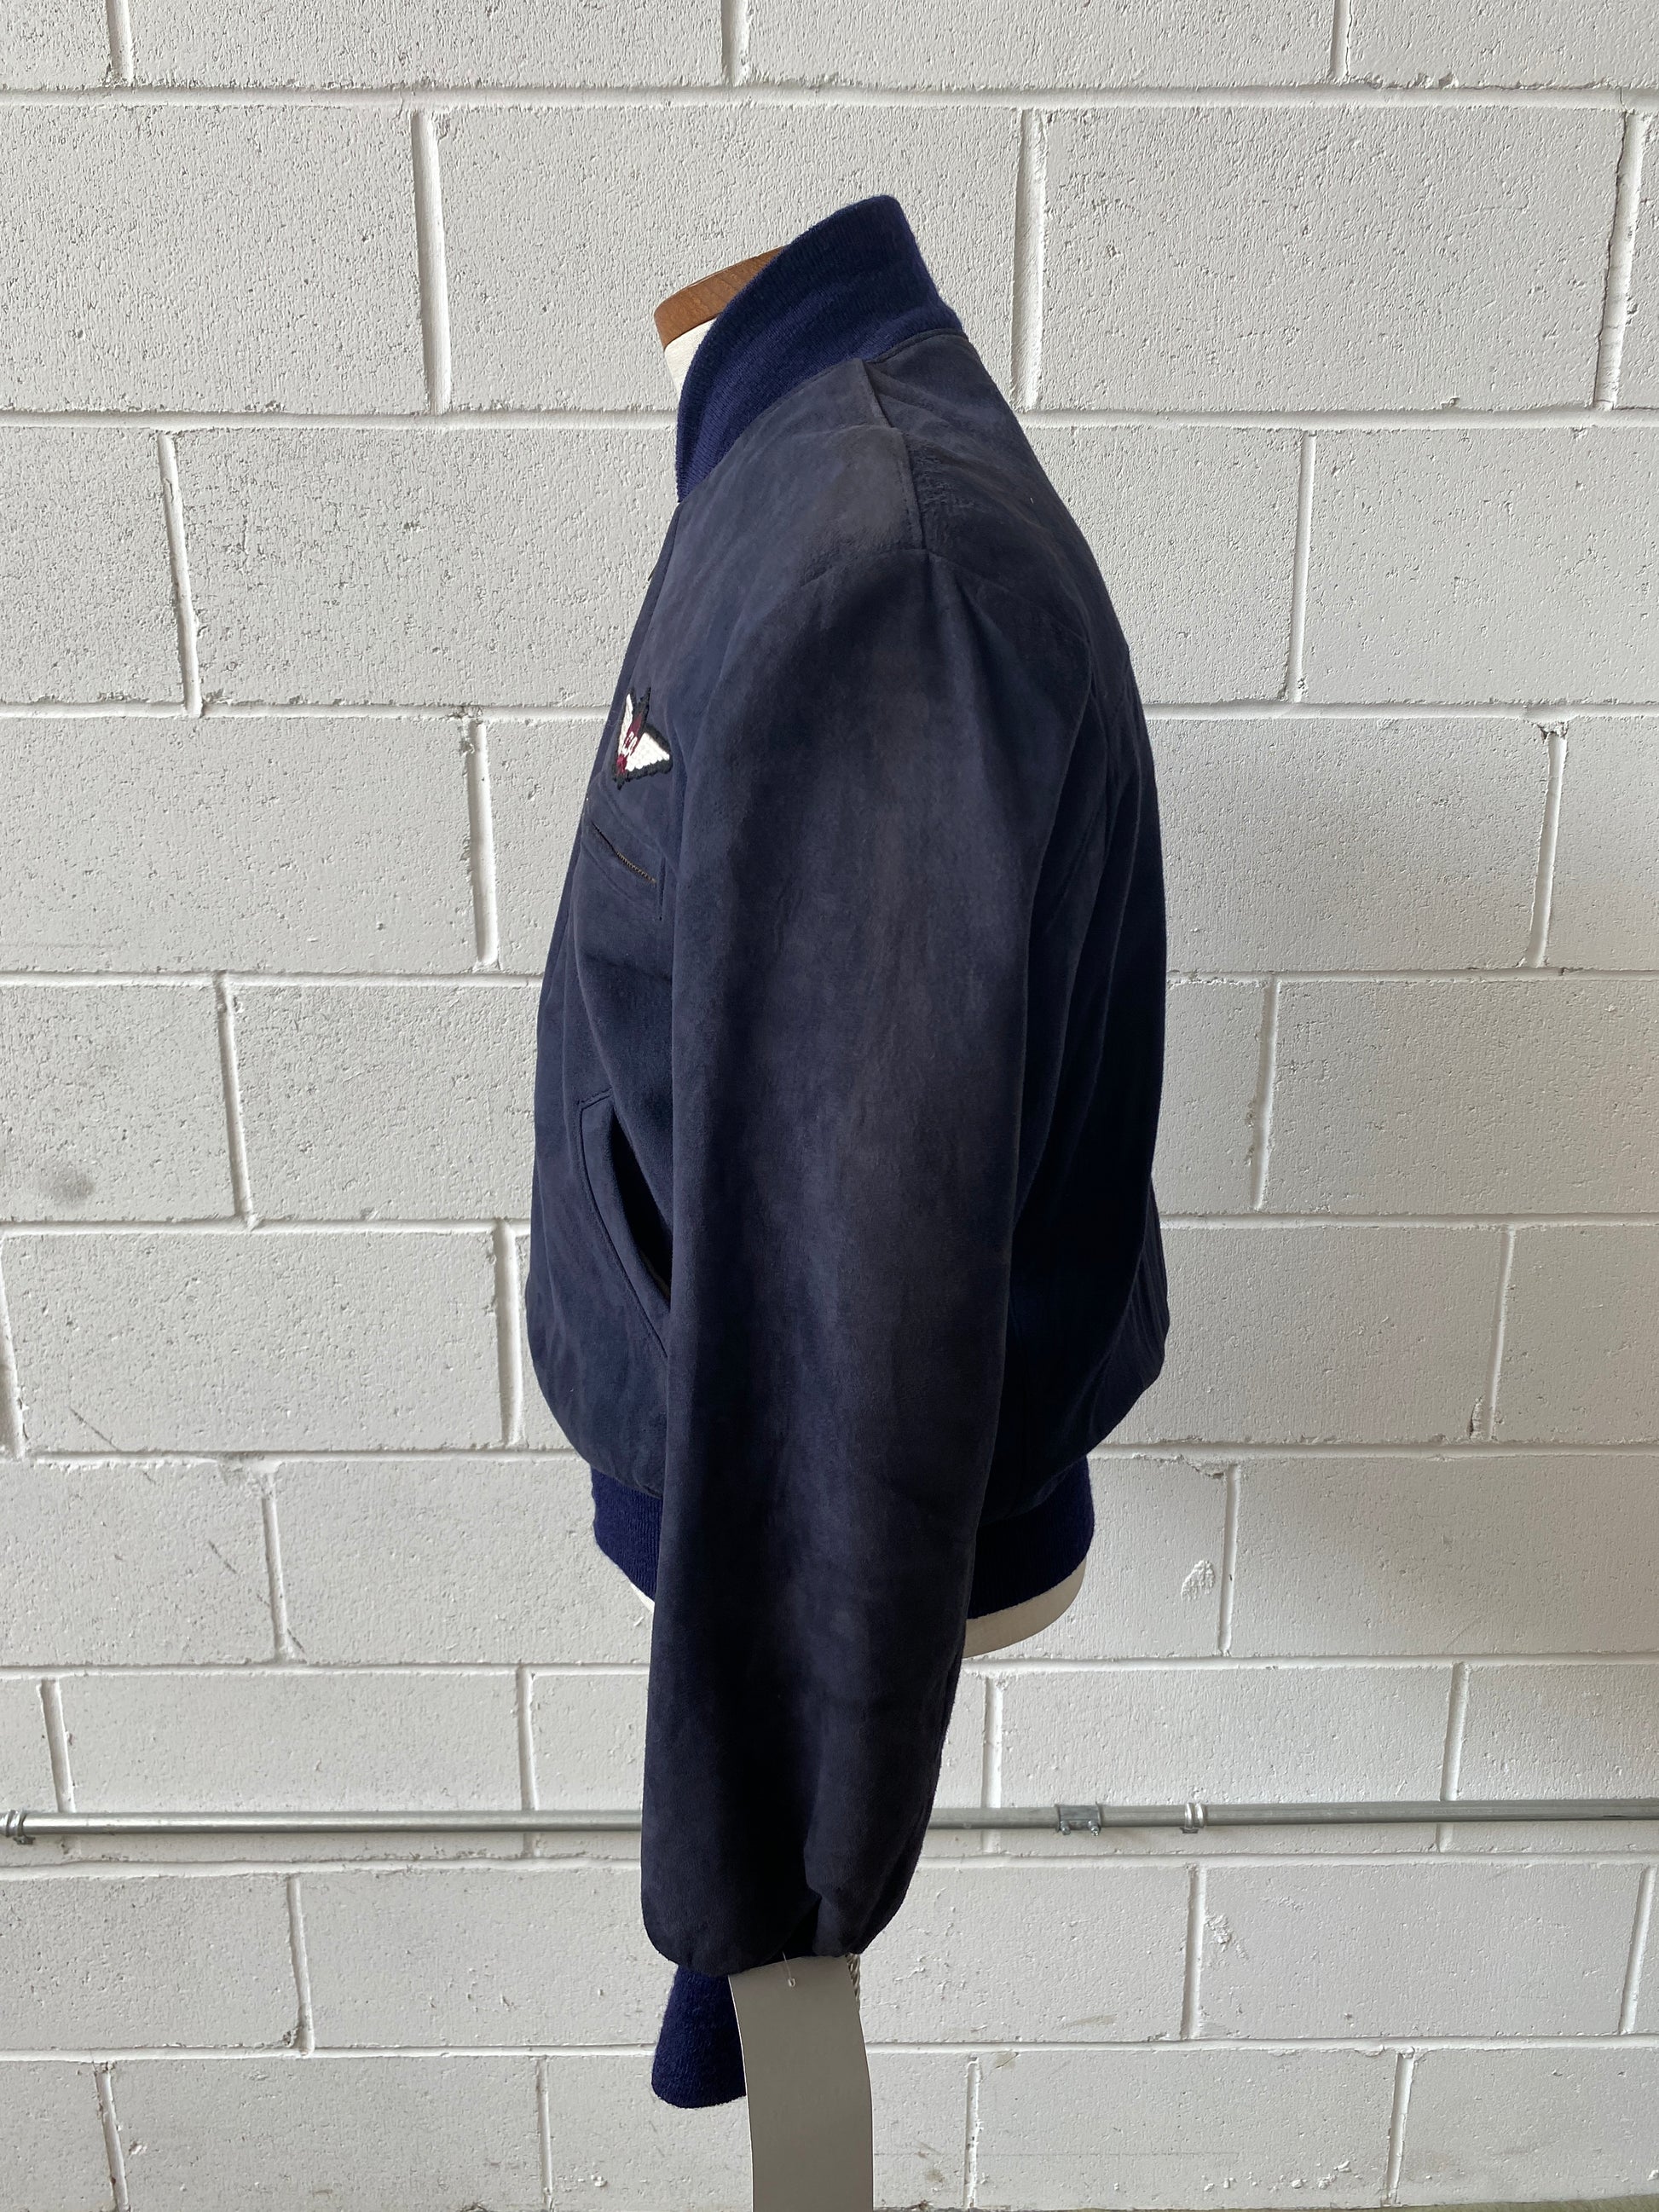 Vintage 1950s Men's Navy Suede Canadian Bomber Jacket, Small 